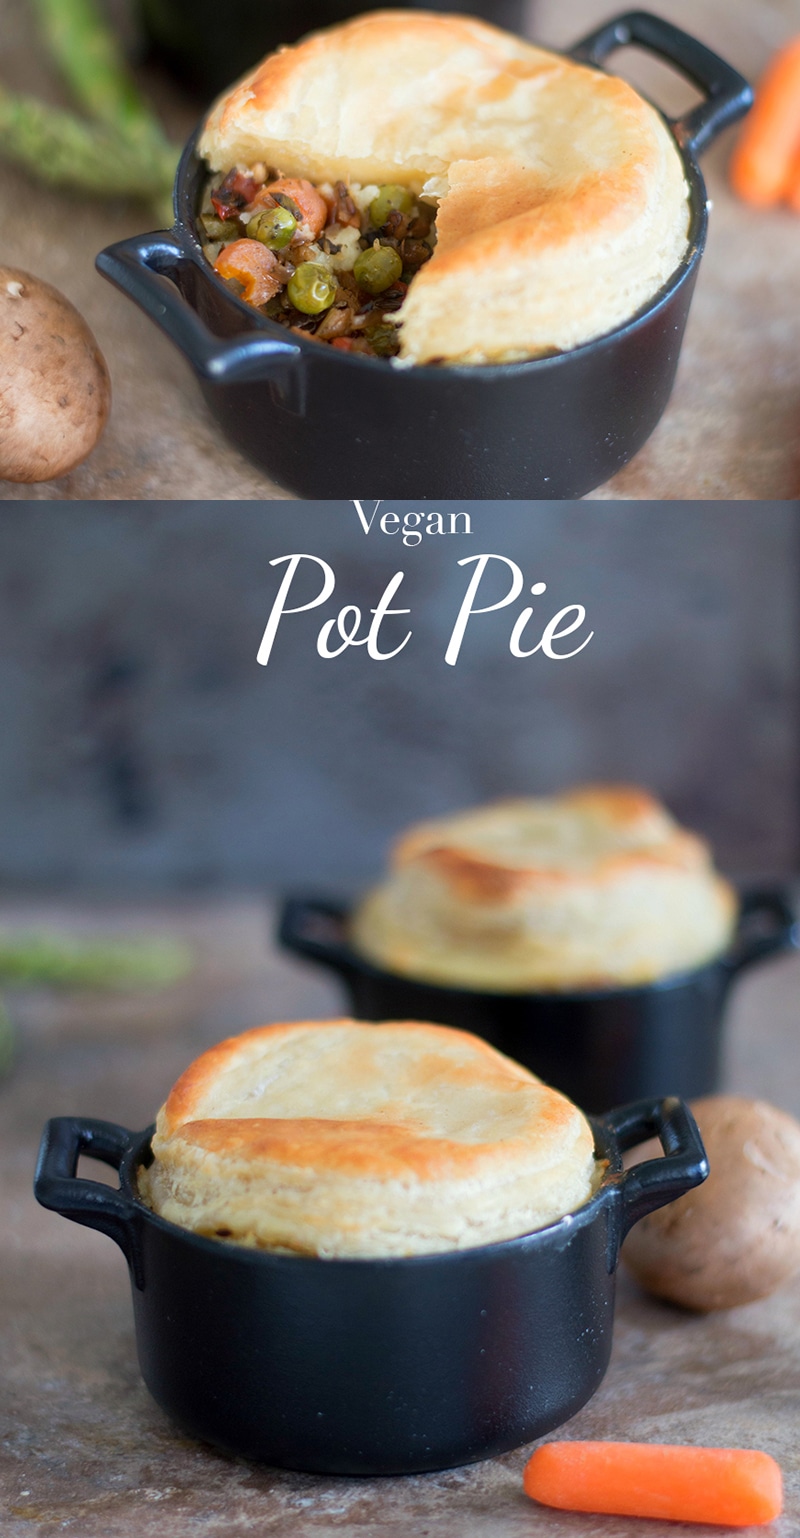 Quick and easy vegan pot pie recipe. Made with all fresh vegetables and uses almond milk instead of butter for basting. Make for perfect vegan comfort food